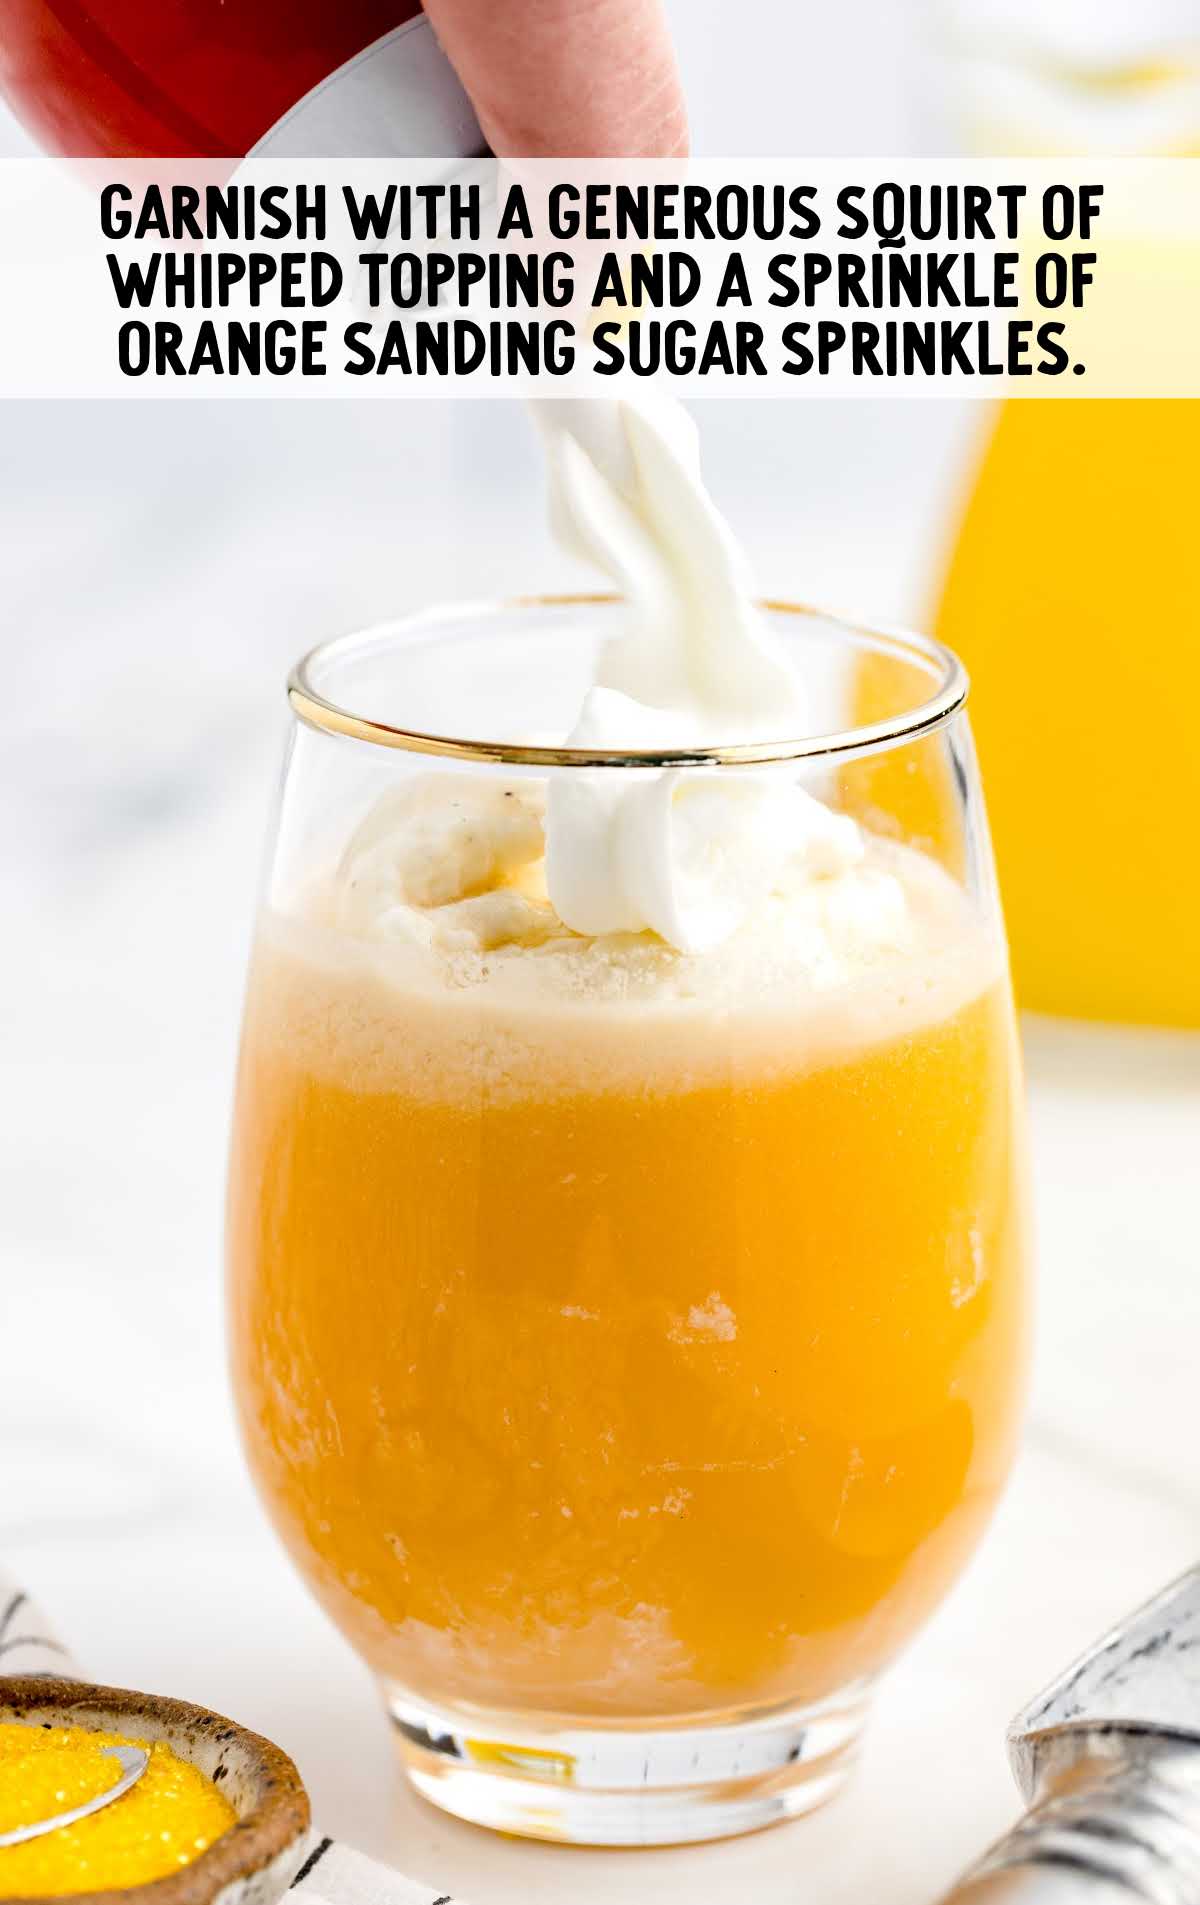 whipped topping garnished on top of the cocktail and orange sanding sugar sprinkled in a glass